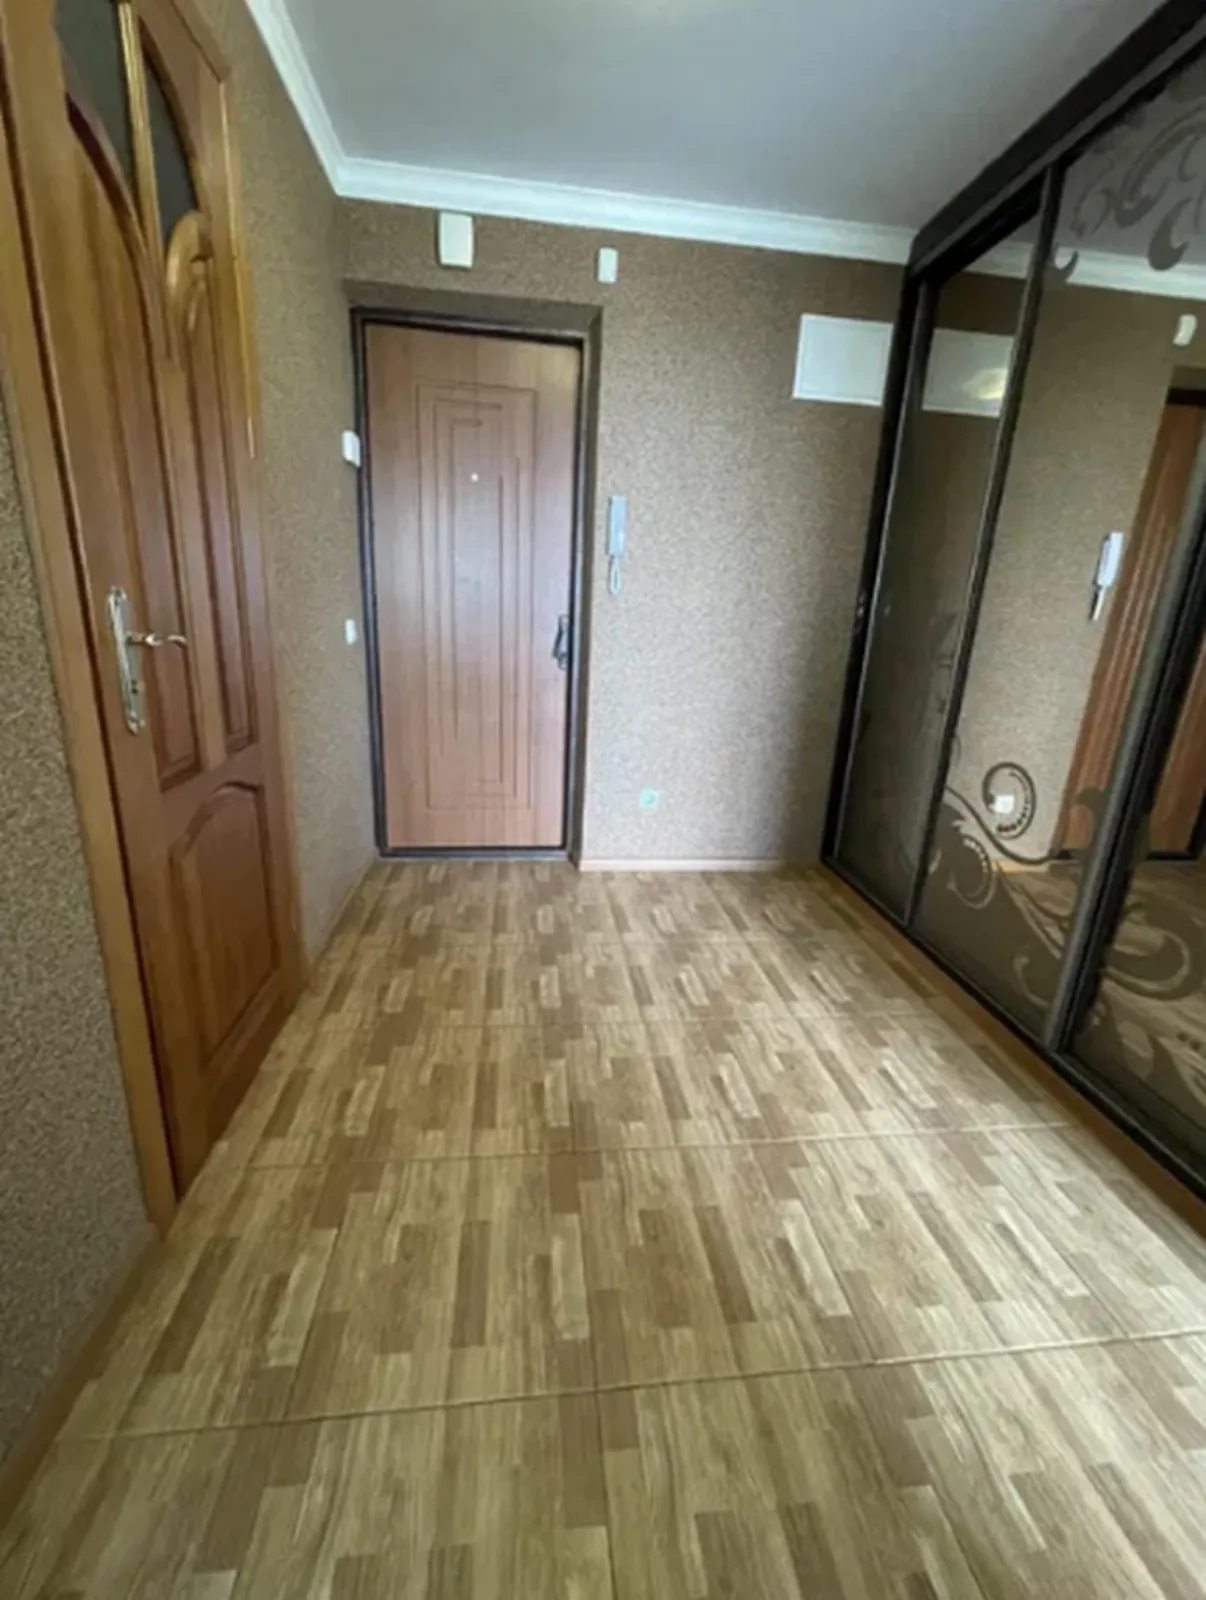 Apartment for rent. 1 room, 45 m², 9th floor/10 floors. Bam, Ternopil. 